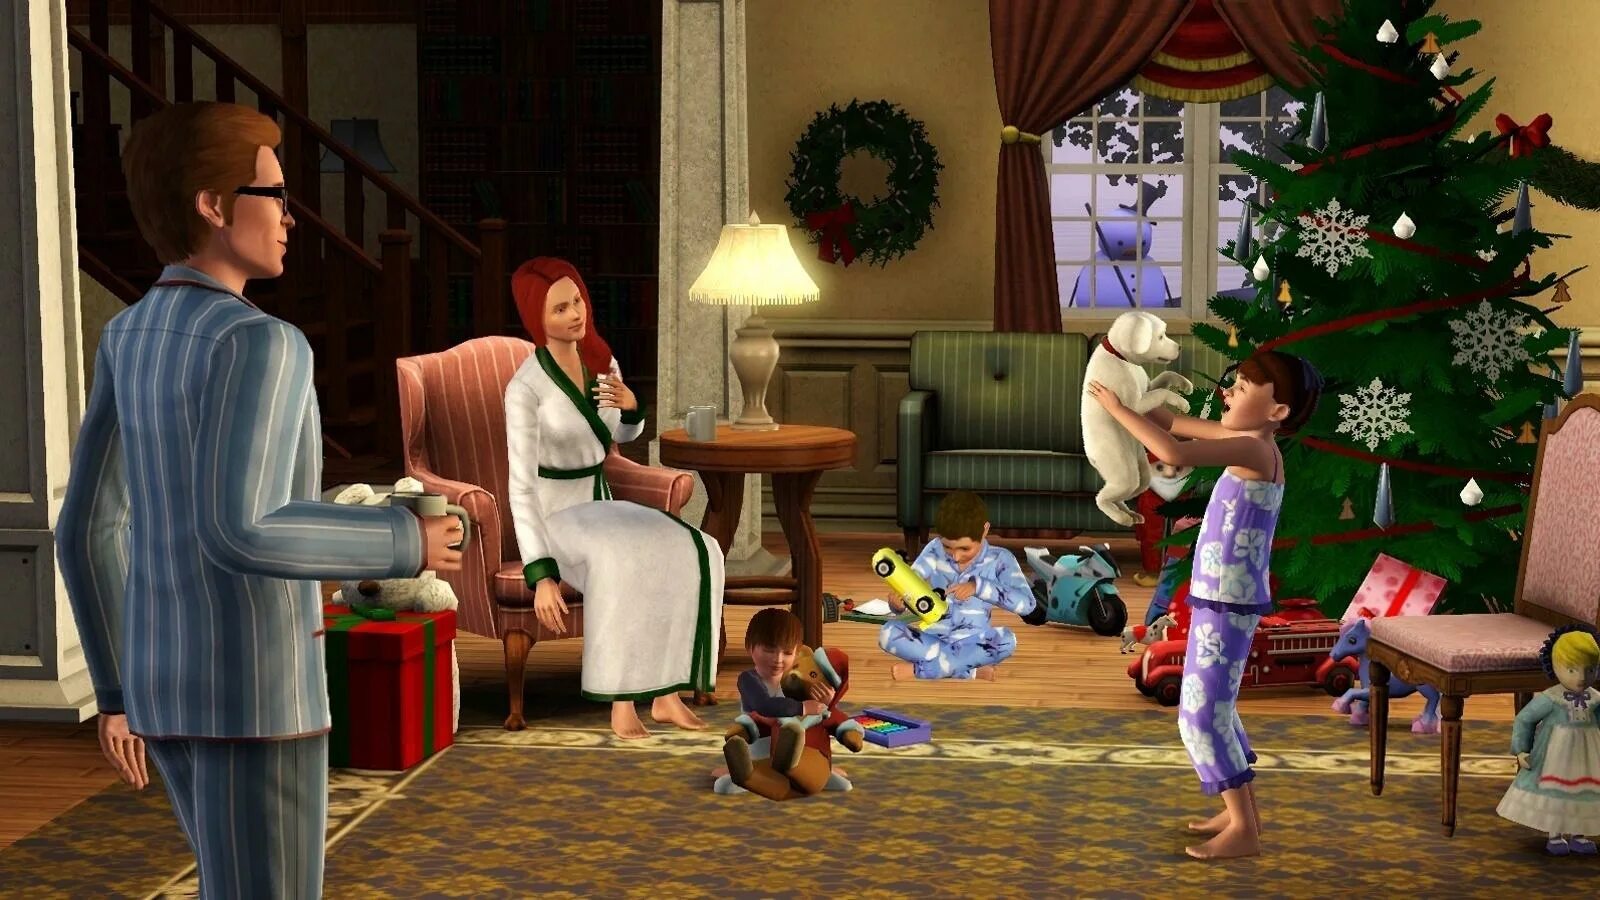 The SIMS 3. The SIMS 3 питомцы. SIMS 3 игра. Игра симс 3 питомцы. Family games 3